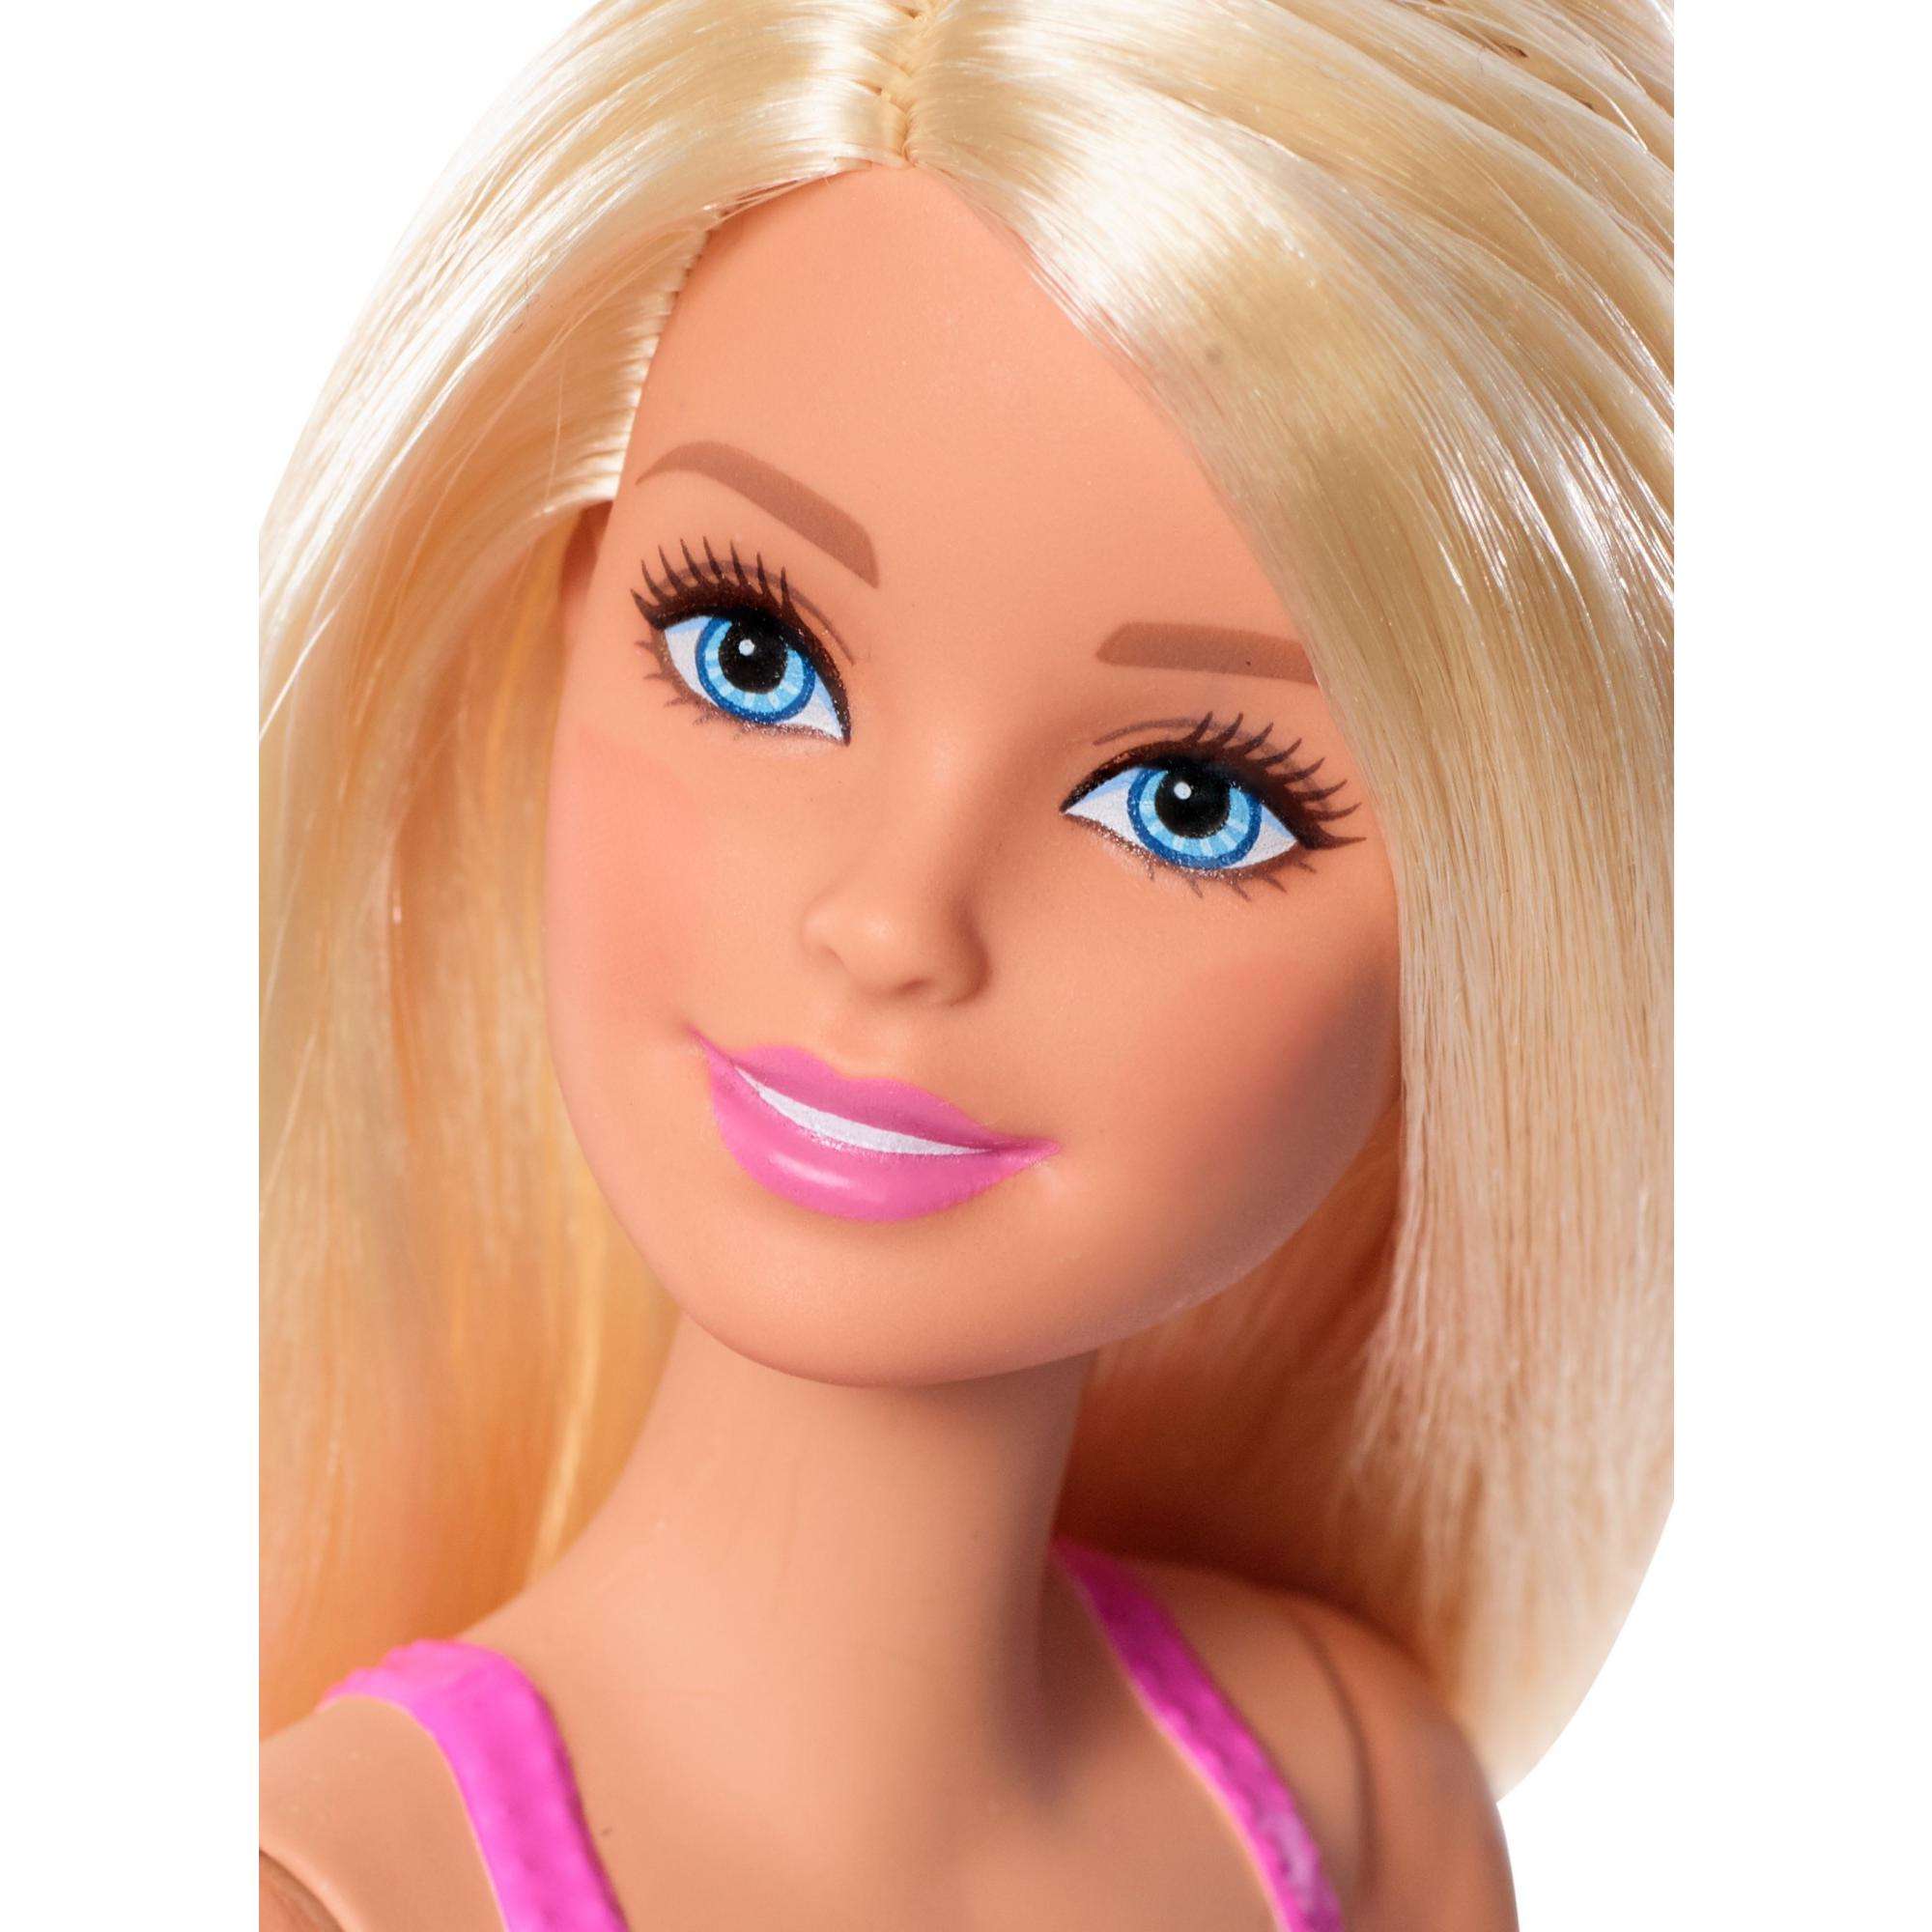 Barbie Beach Doll with Pink Graphic One-Piece Swimsuit - image 3 of 5